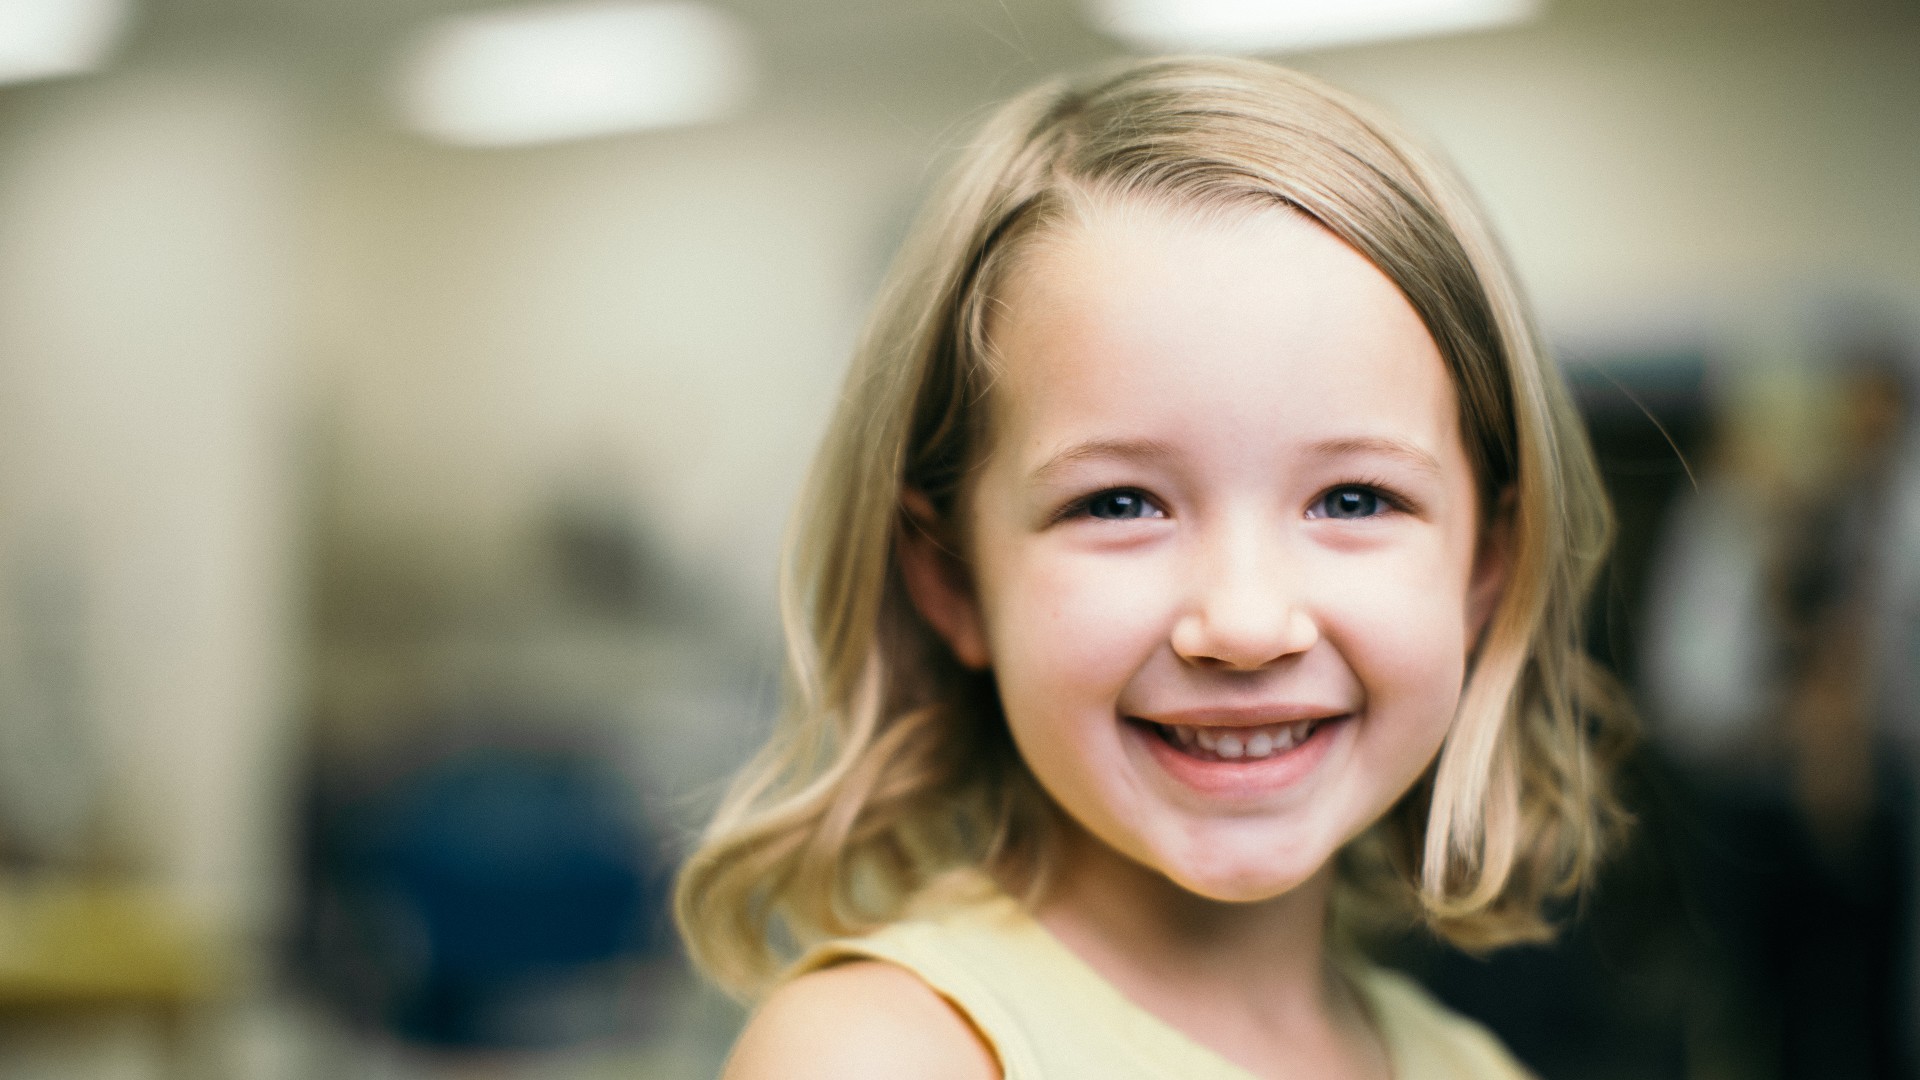 Young girl smiling in hallway